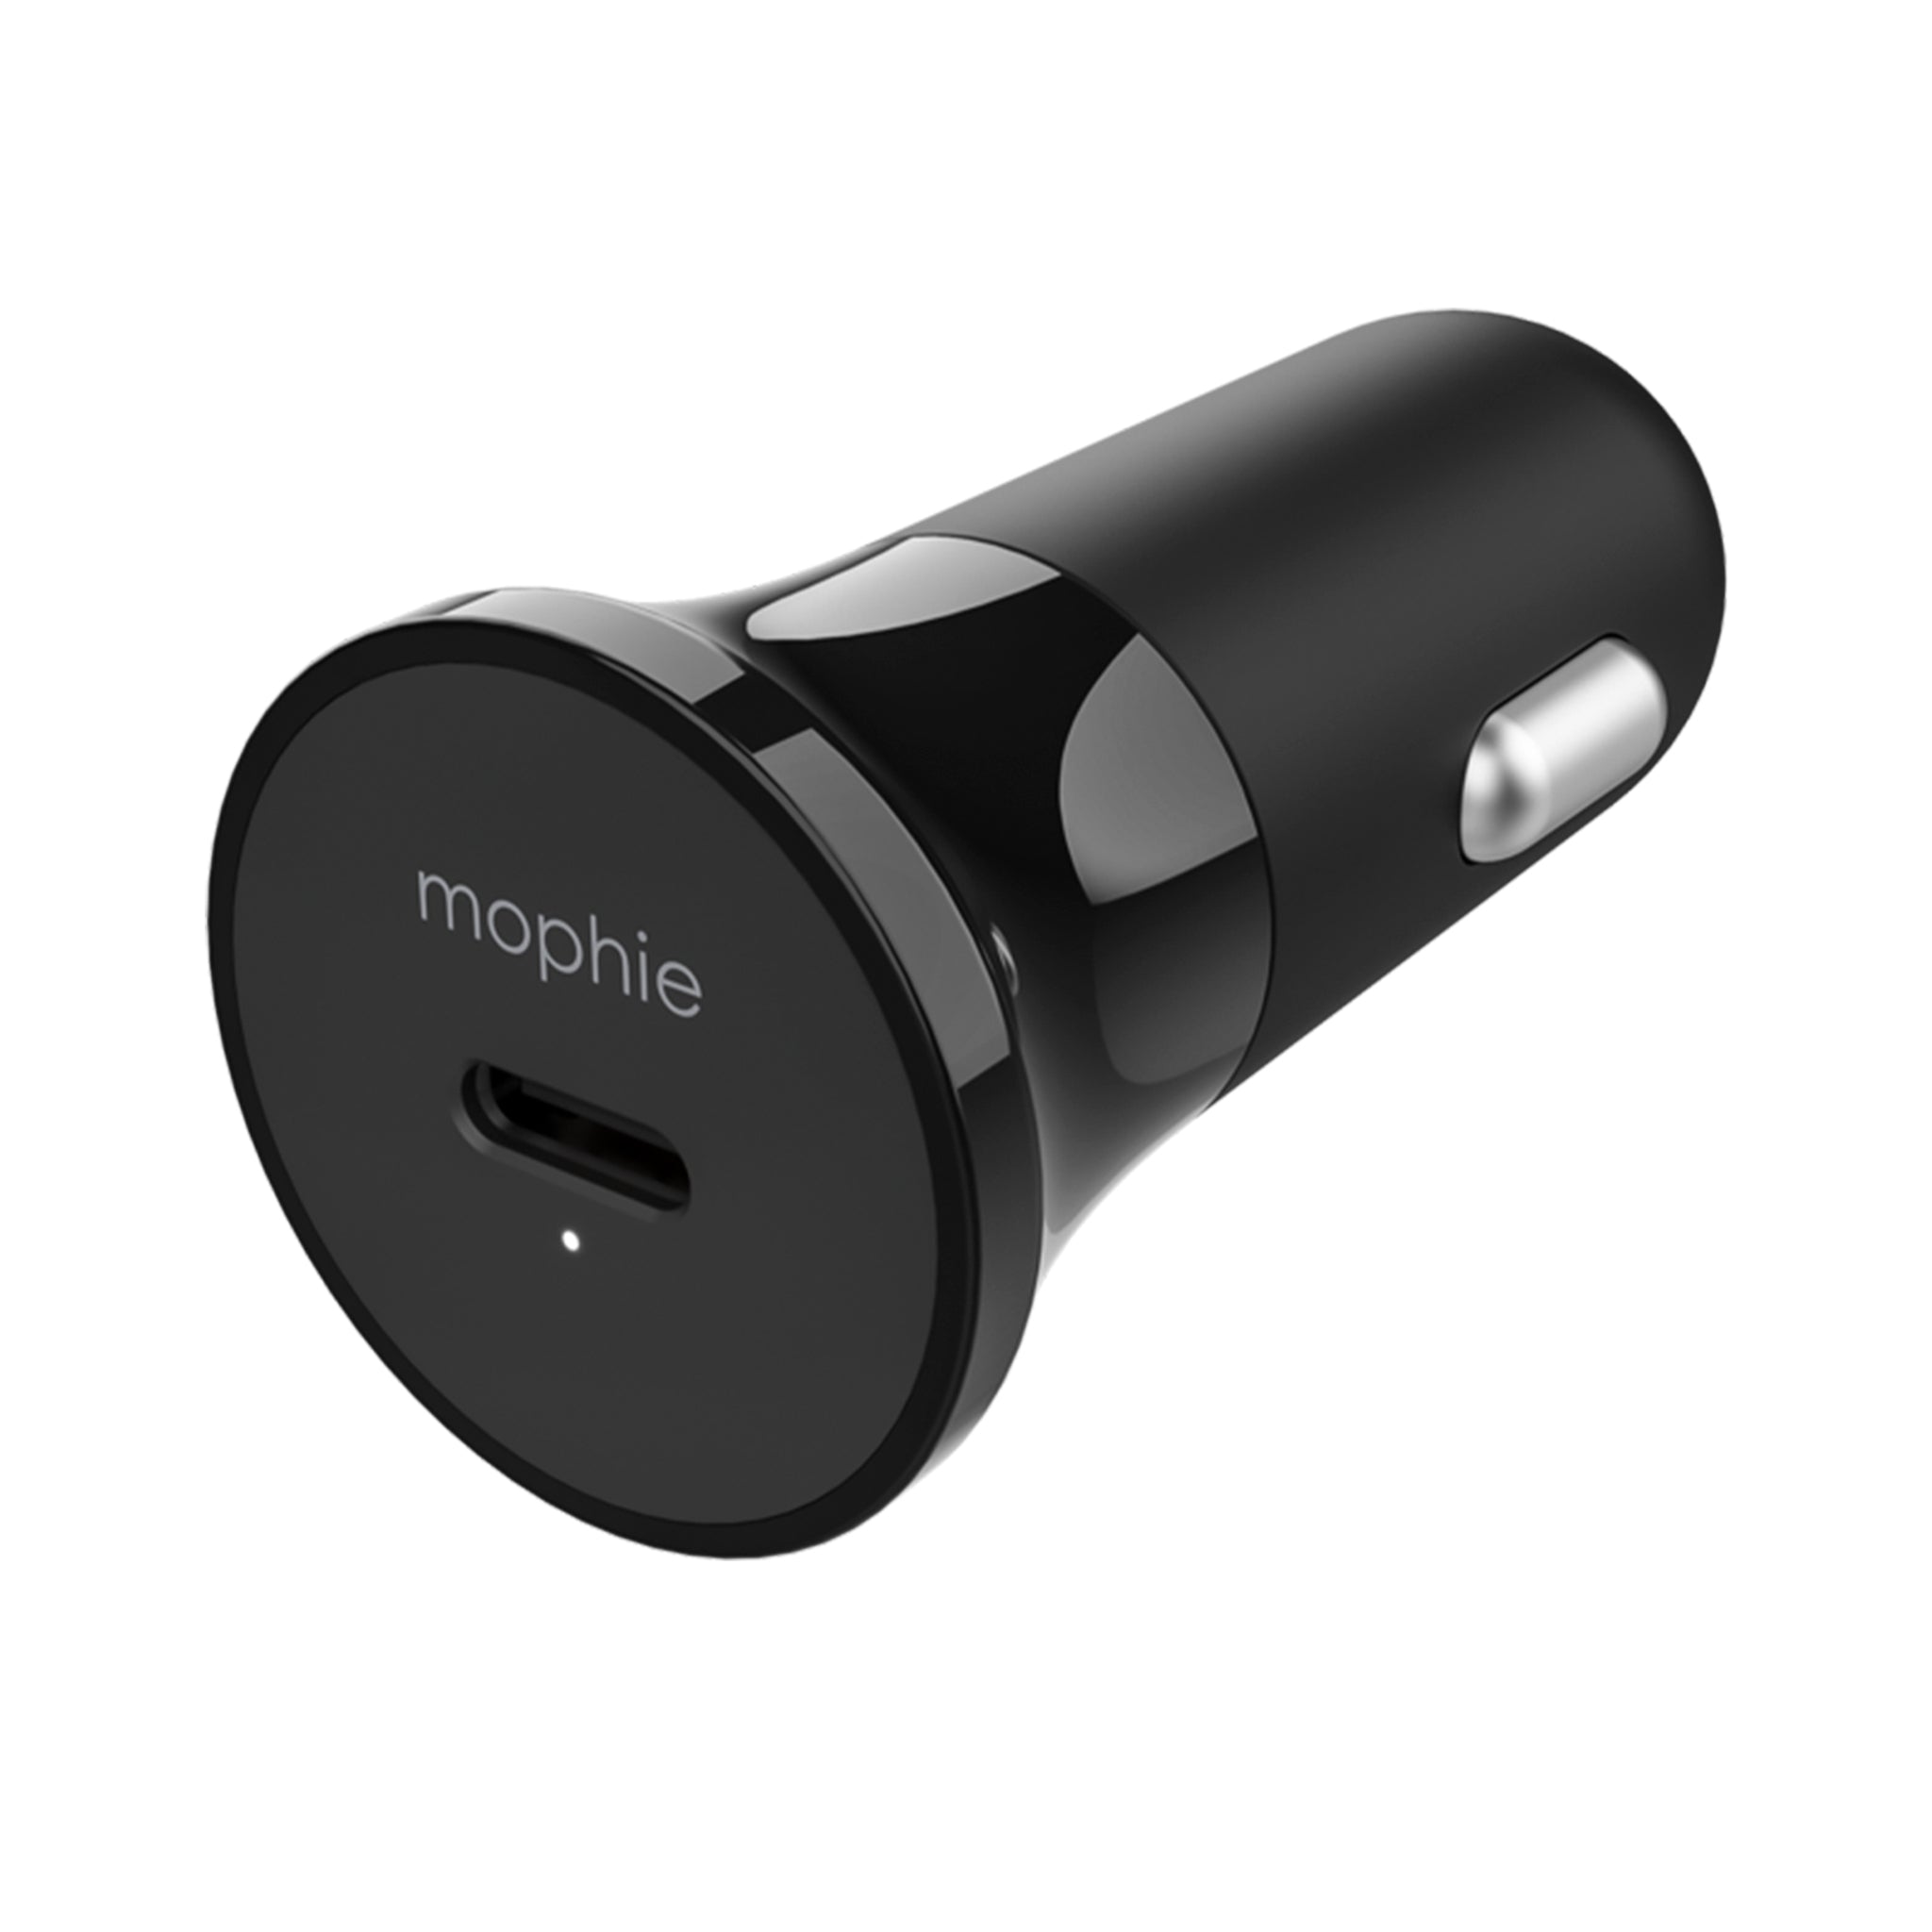 Mophie - Usb C Car Charger 18w - Black